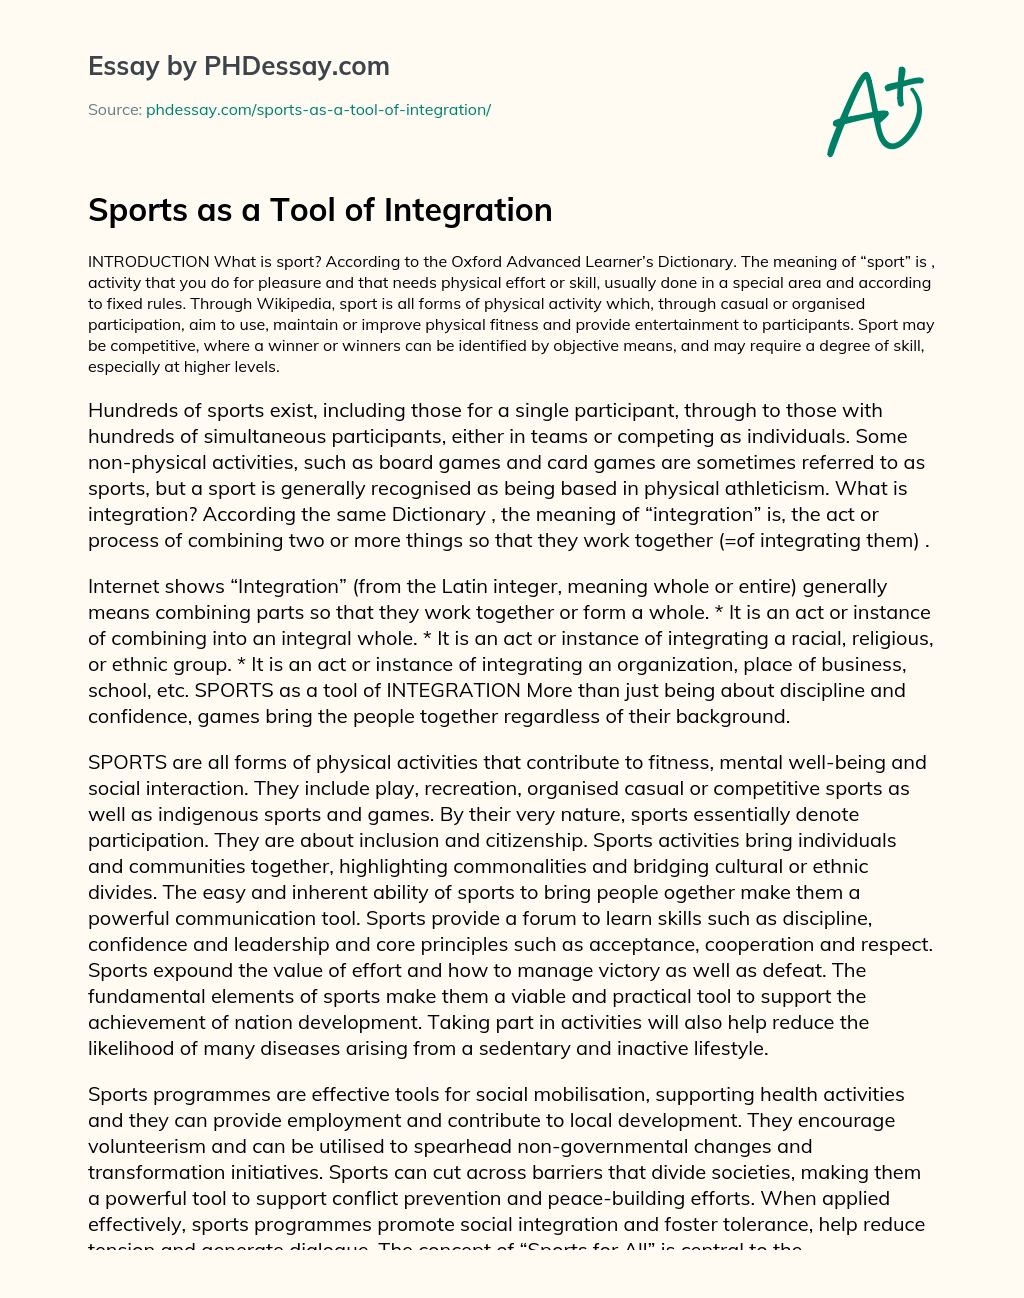 Sports as a Tool of Integration essay